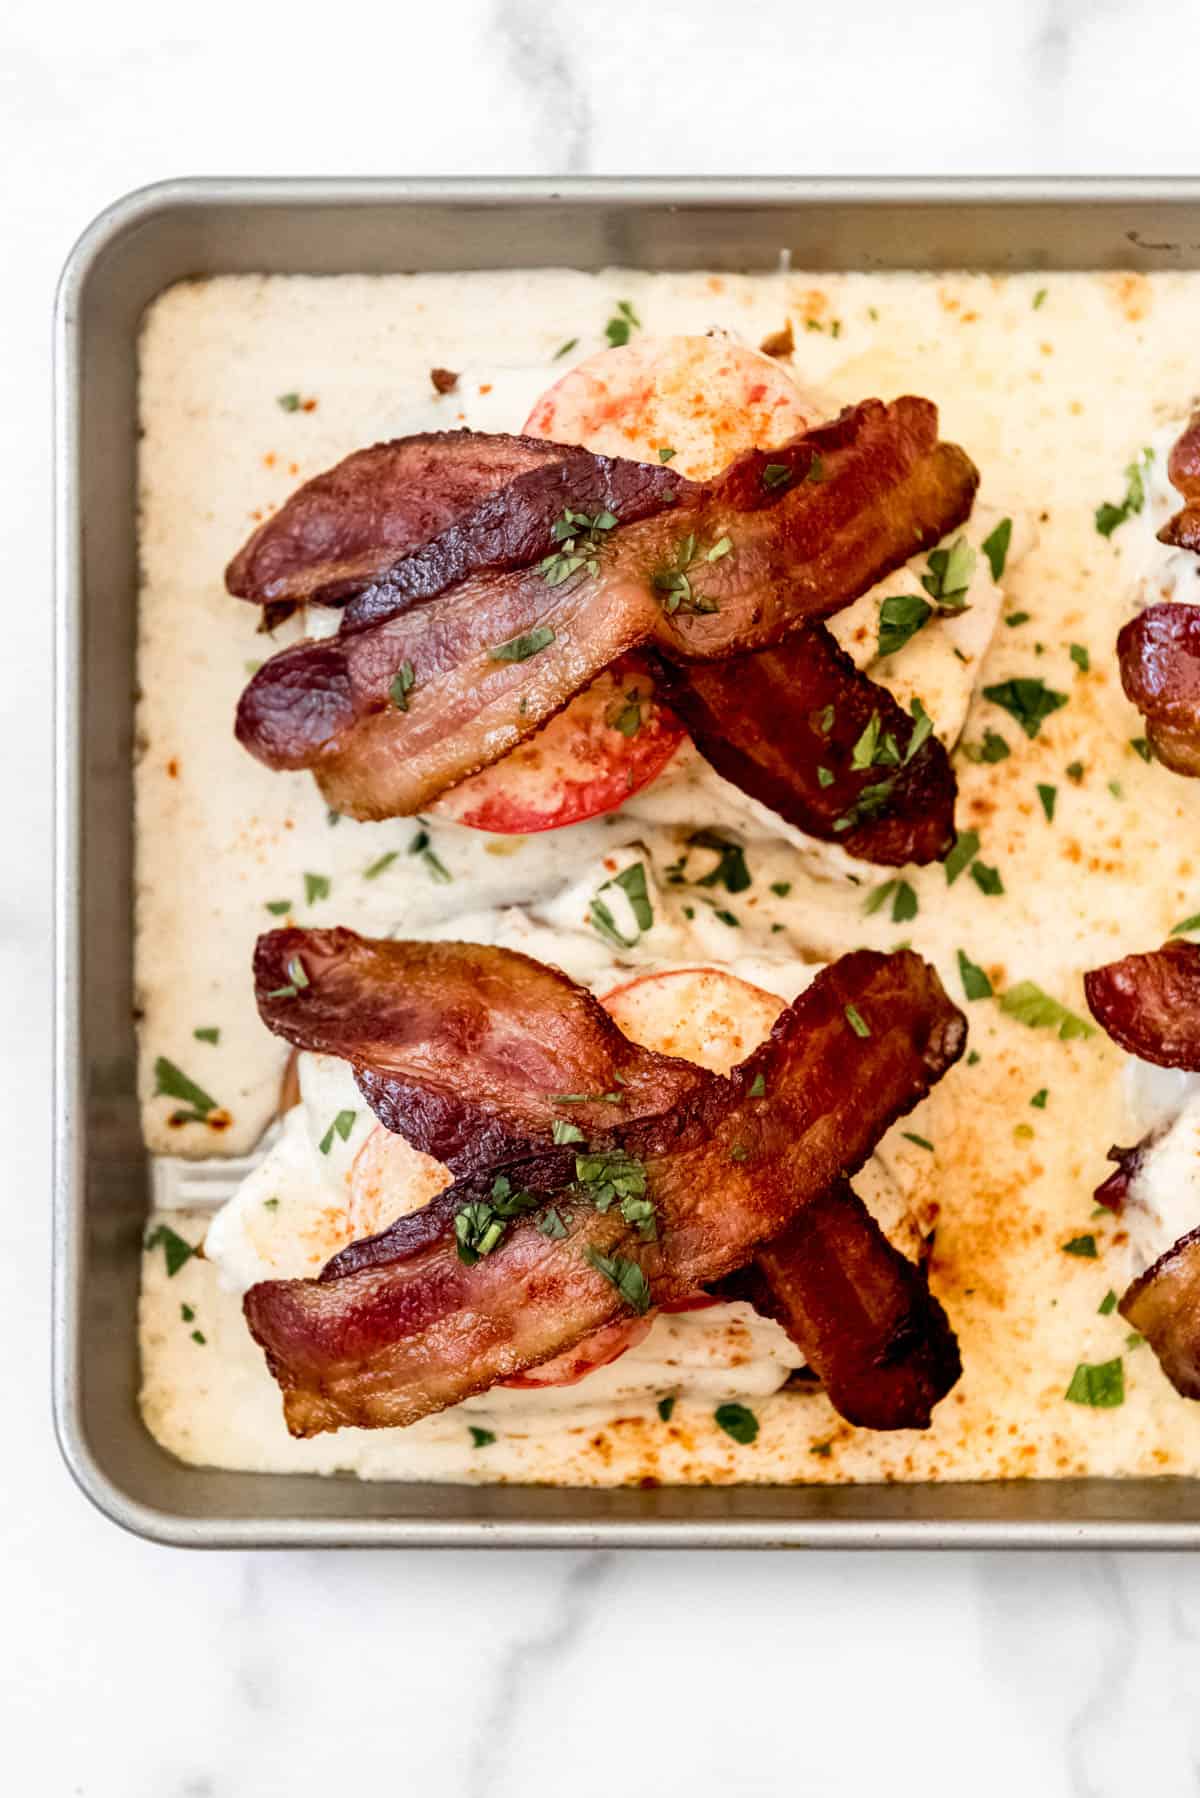 Two hot browns on sheet pan.